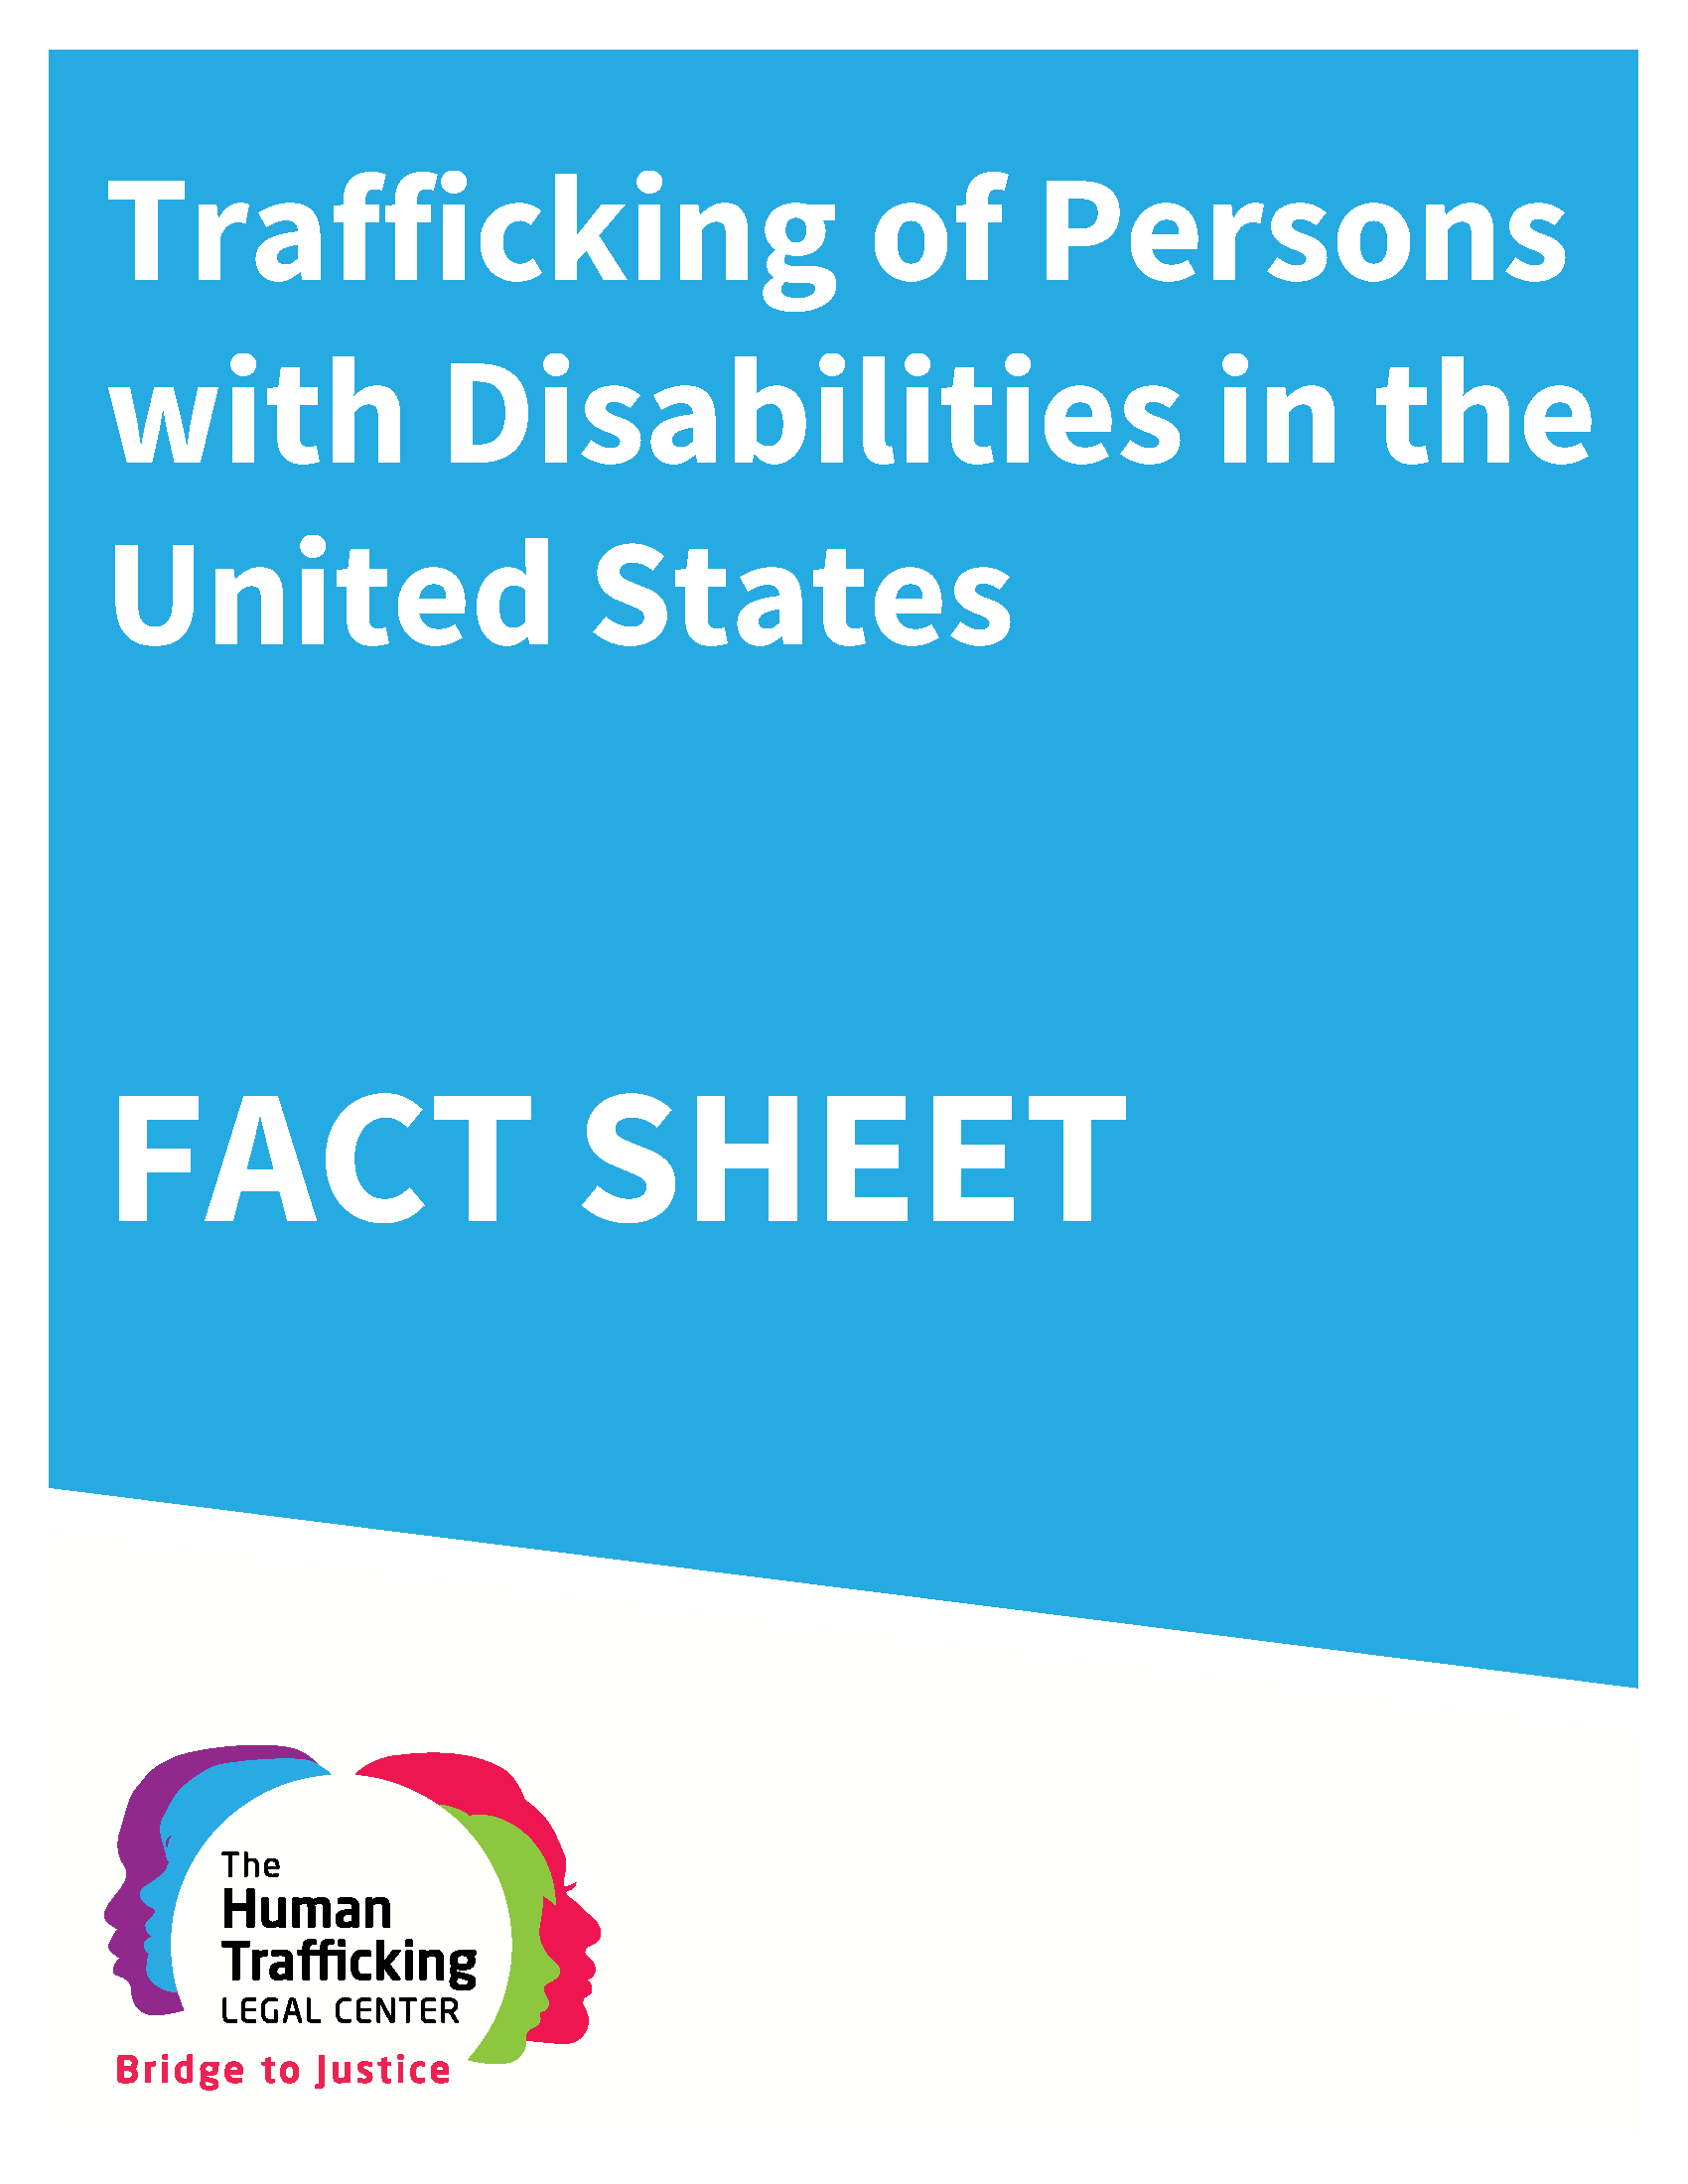 Trafficking of Persons with Disabilities in the United States Fact Sheet